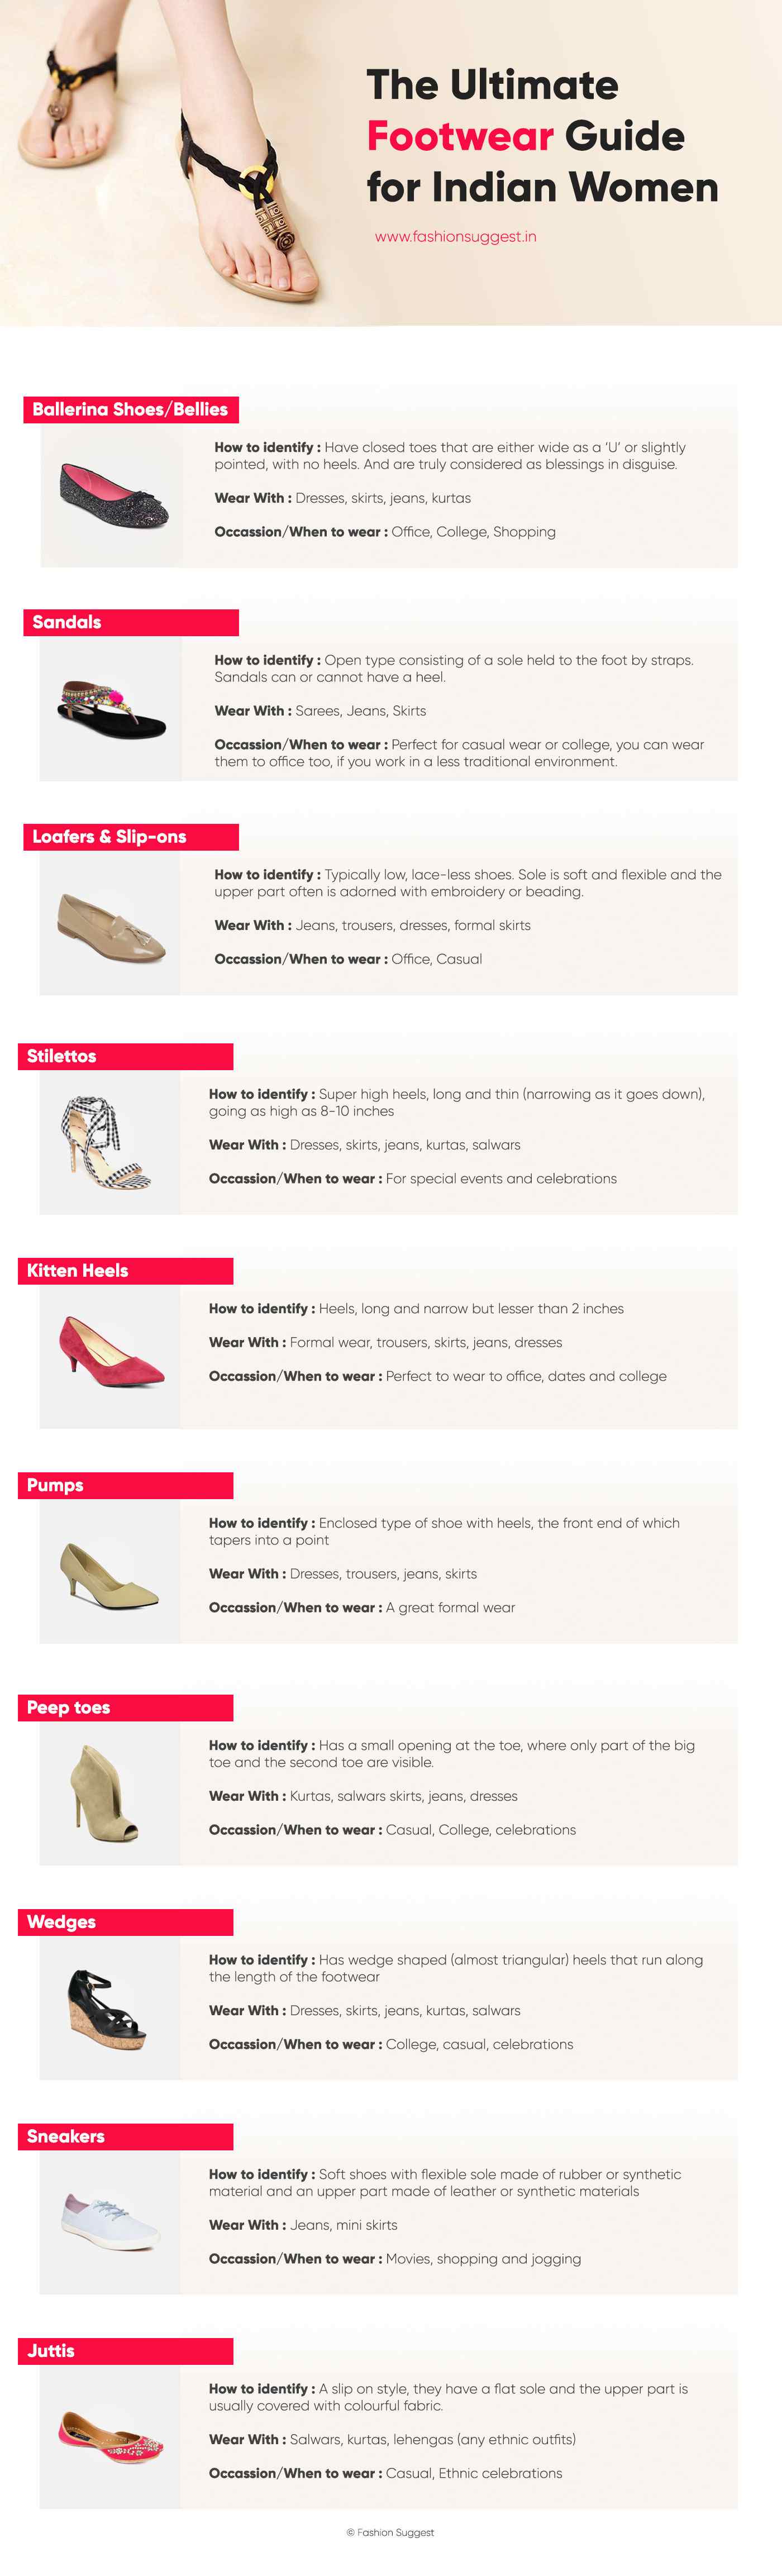 The Ultimate Footwear Guide for Indian Women - Fashion Suggest